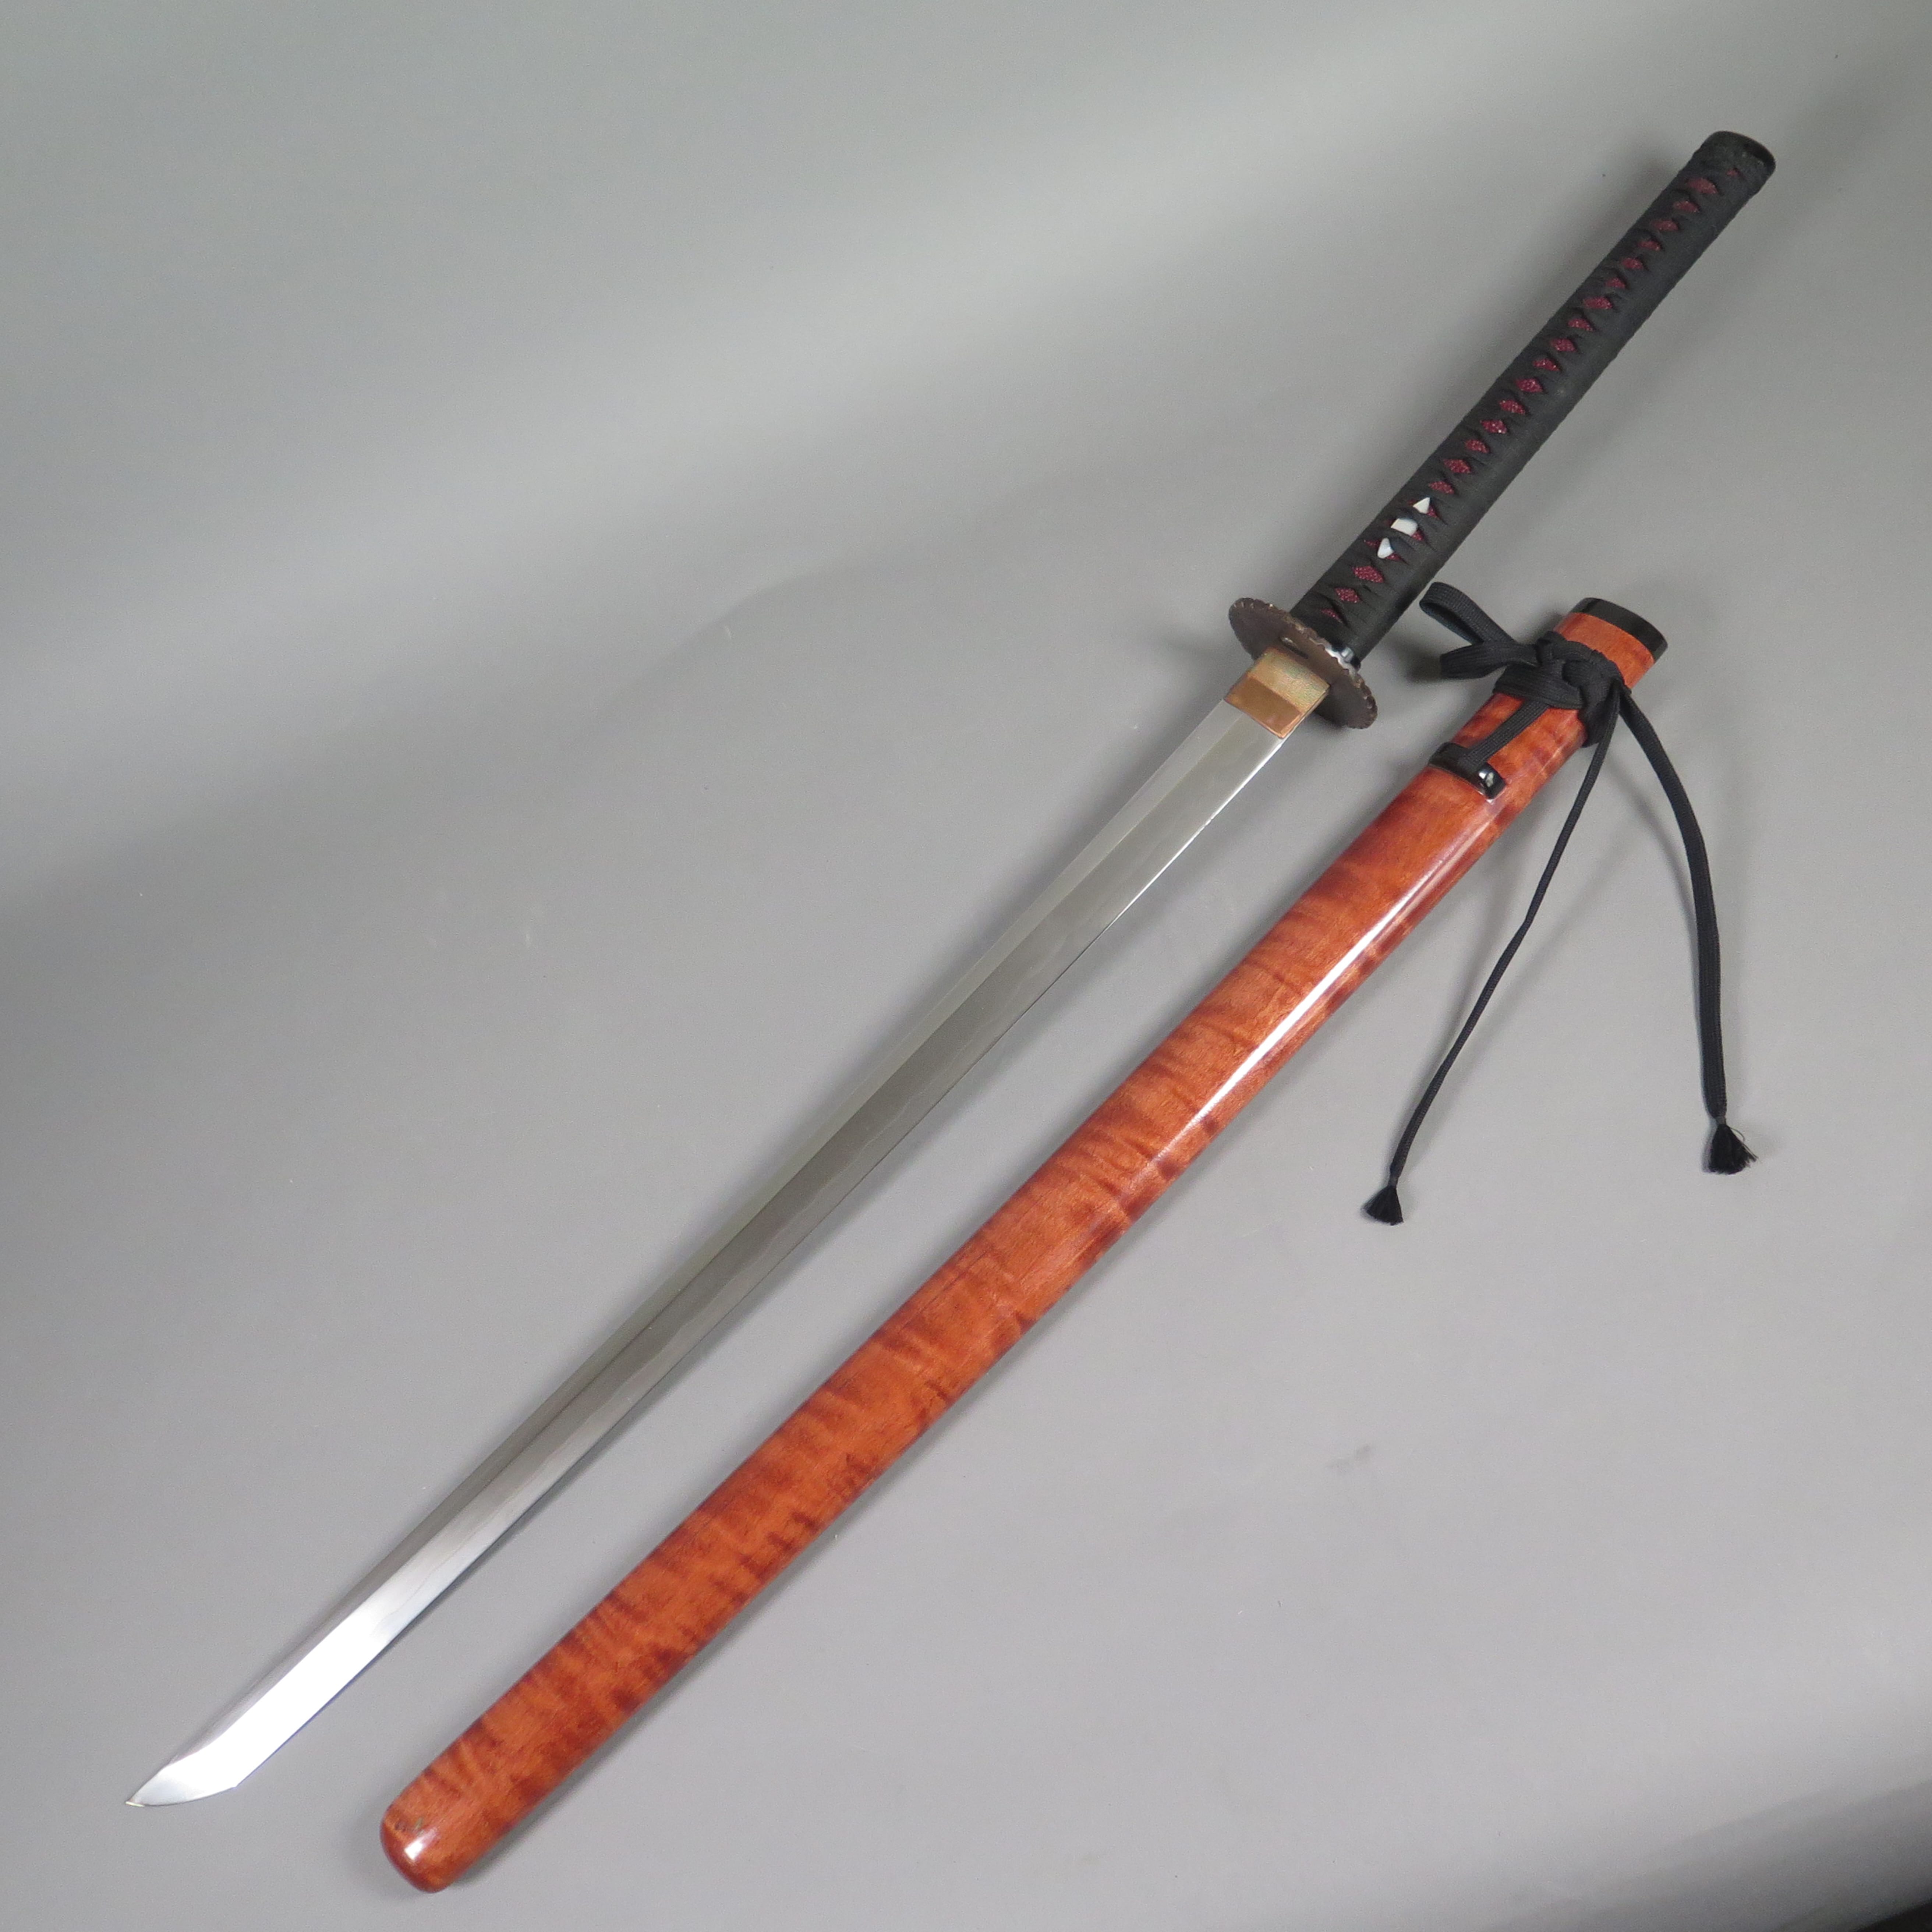 Lot 041: Japanese Sword with Wooden Scabbard c. 1960s